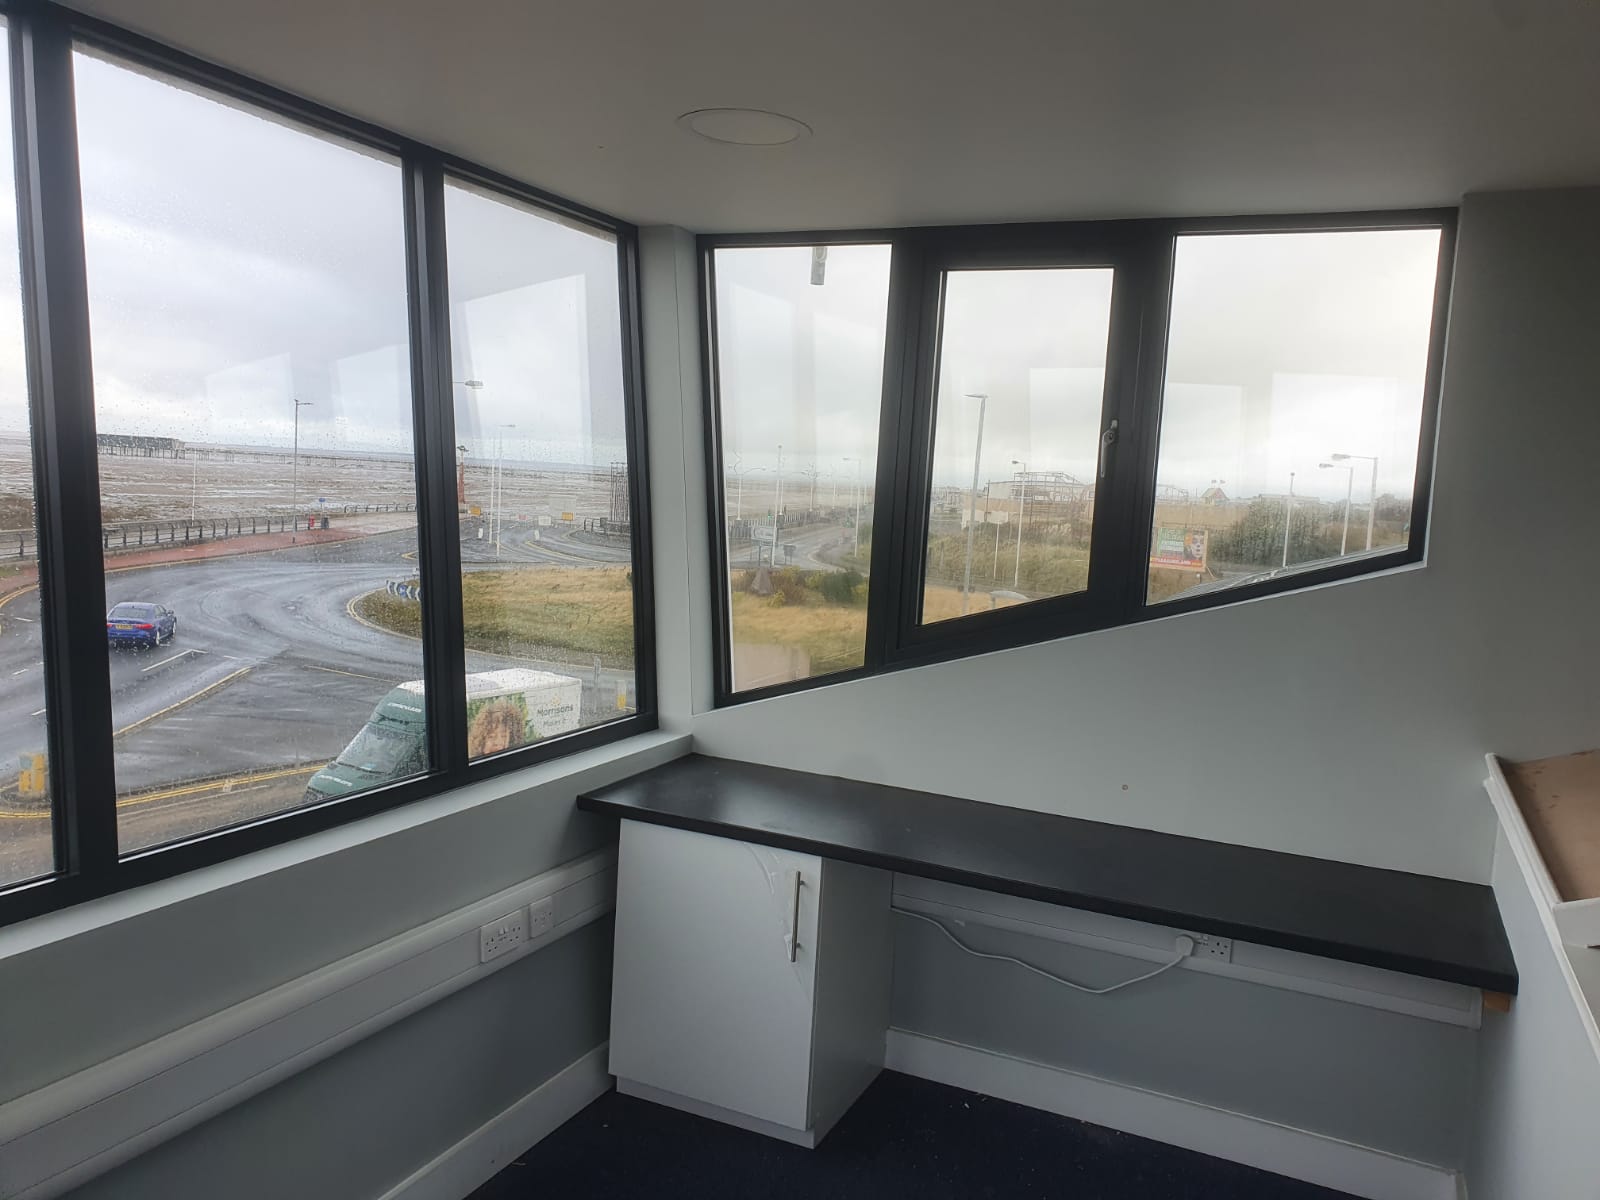 The new Southport Lifeboat Station. On the top floor there is a lookout tower and operations room, where shore crew will be able to keep in contact with all of our assets on training and call outs.